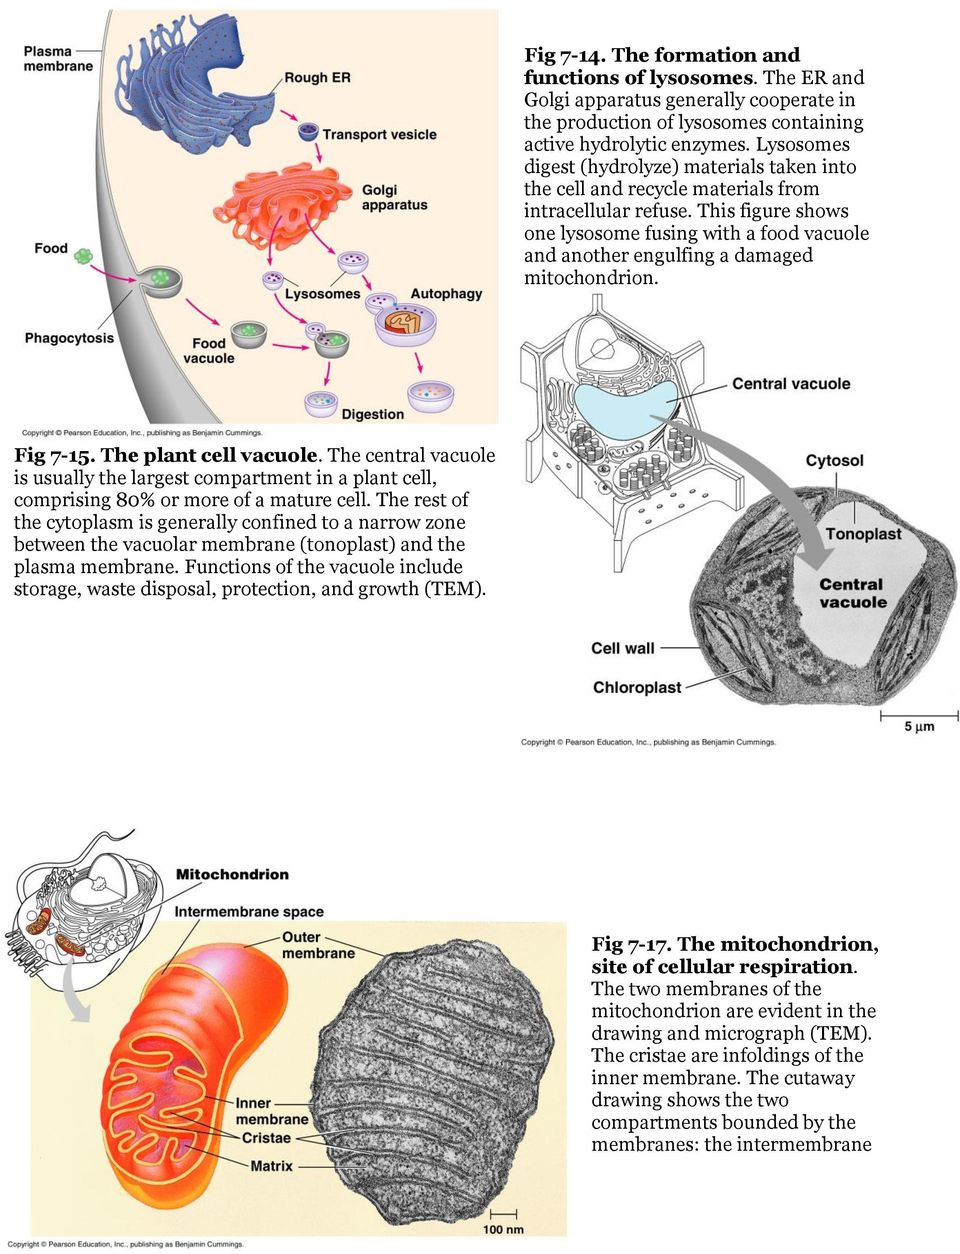 This figure shows one lysosome fusing with a food vacuole and another engulfing a damaged mitochondrion. Fig 7-15. The plant cell vacuole.